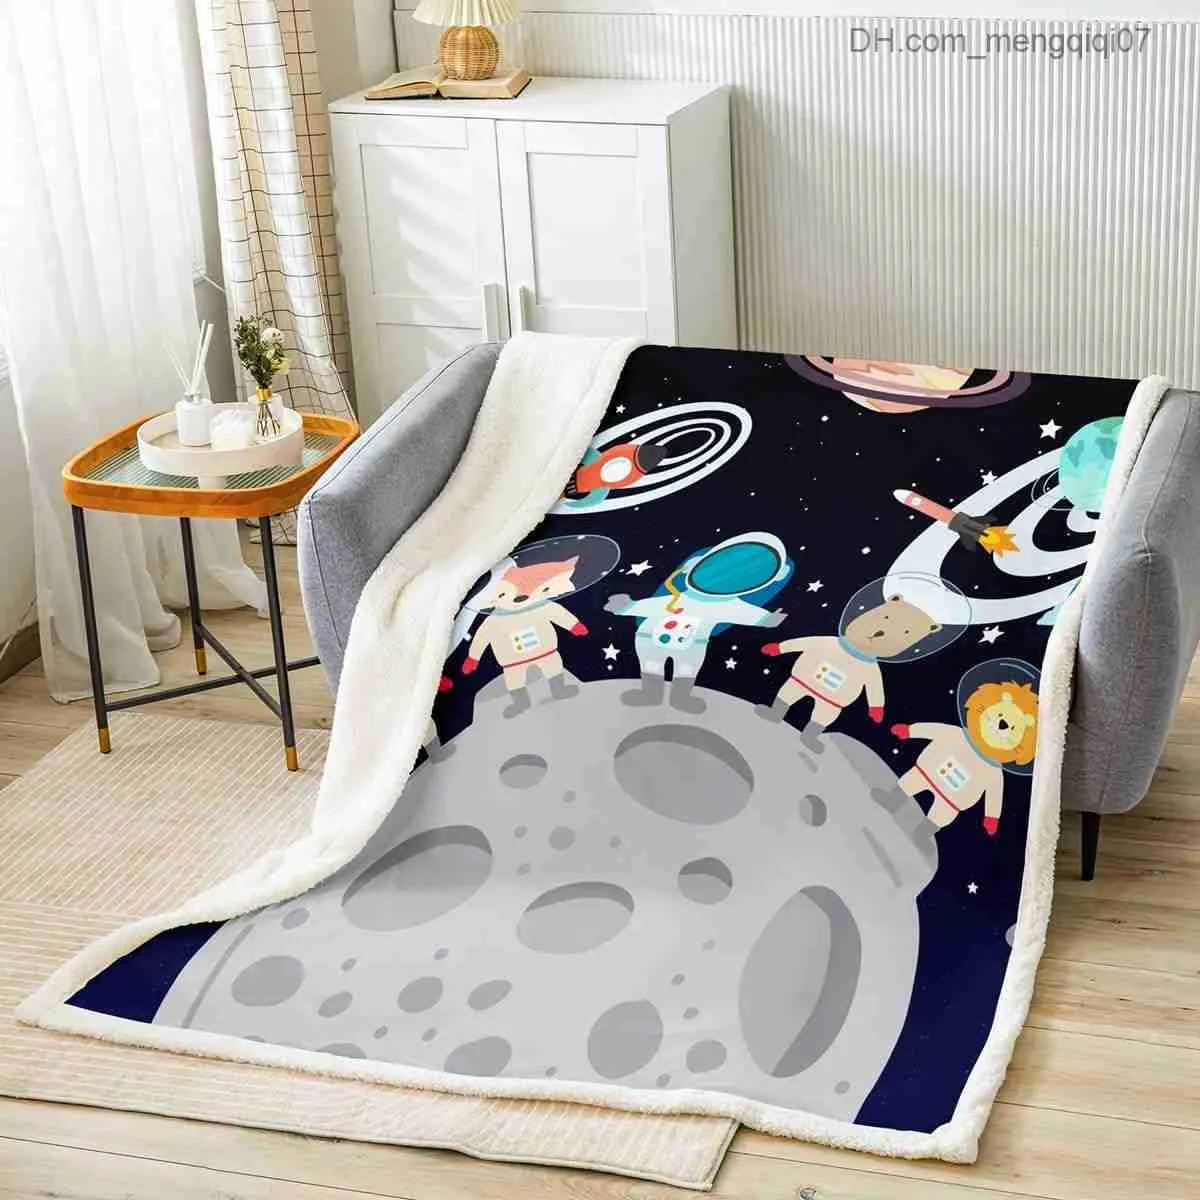 Blankets Swaddling Throwing blankets in outer space cartoon animals astronauts sofas blankets galactic planets rockets children's beds blankets Z230809